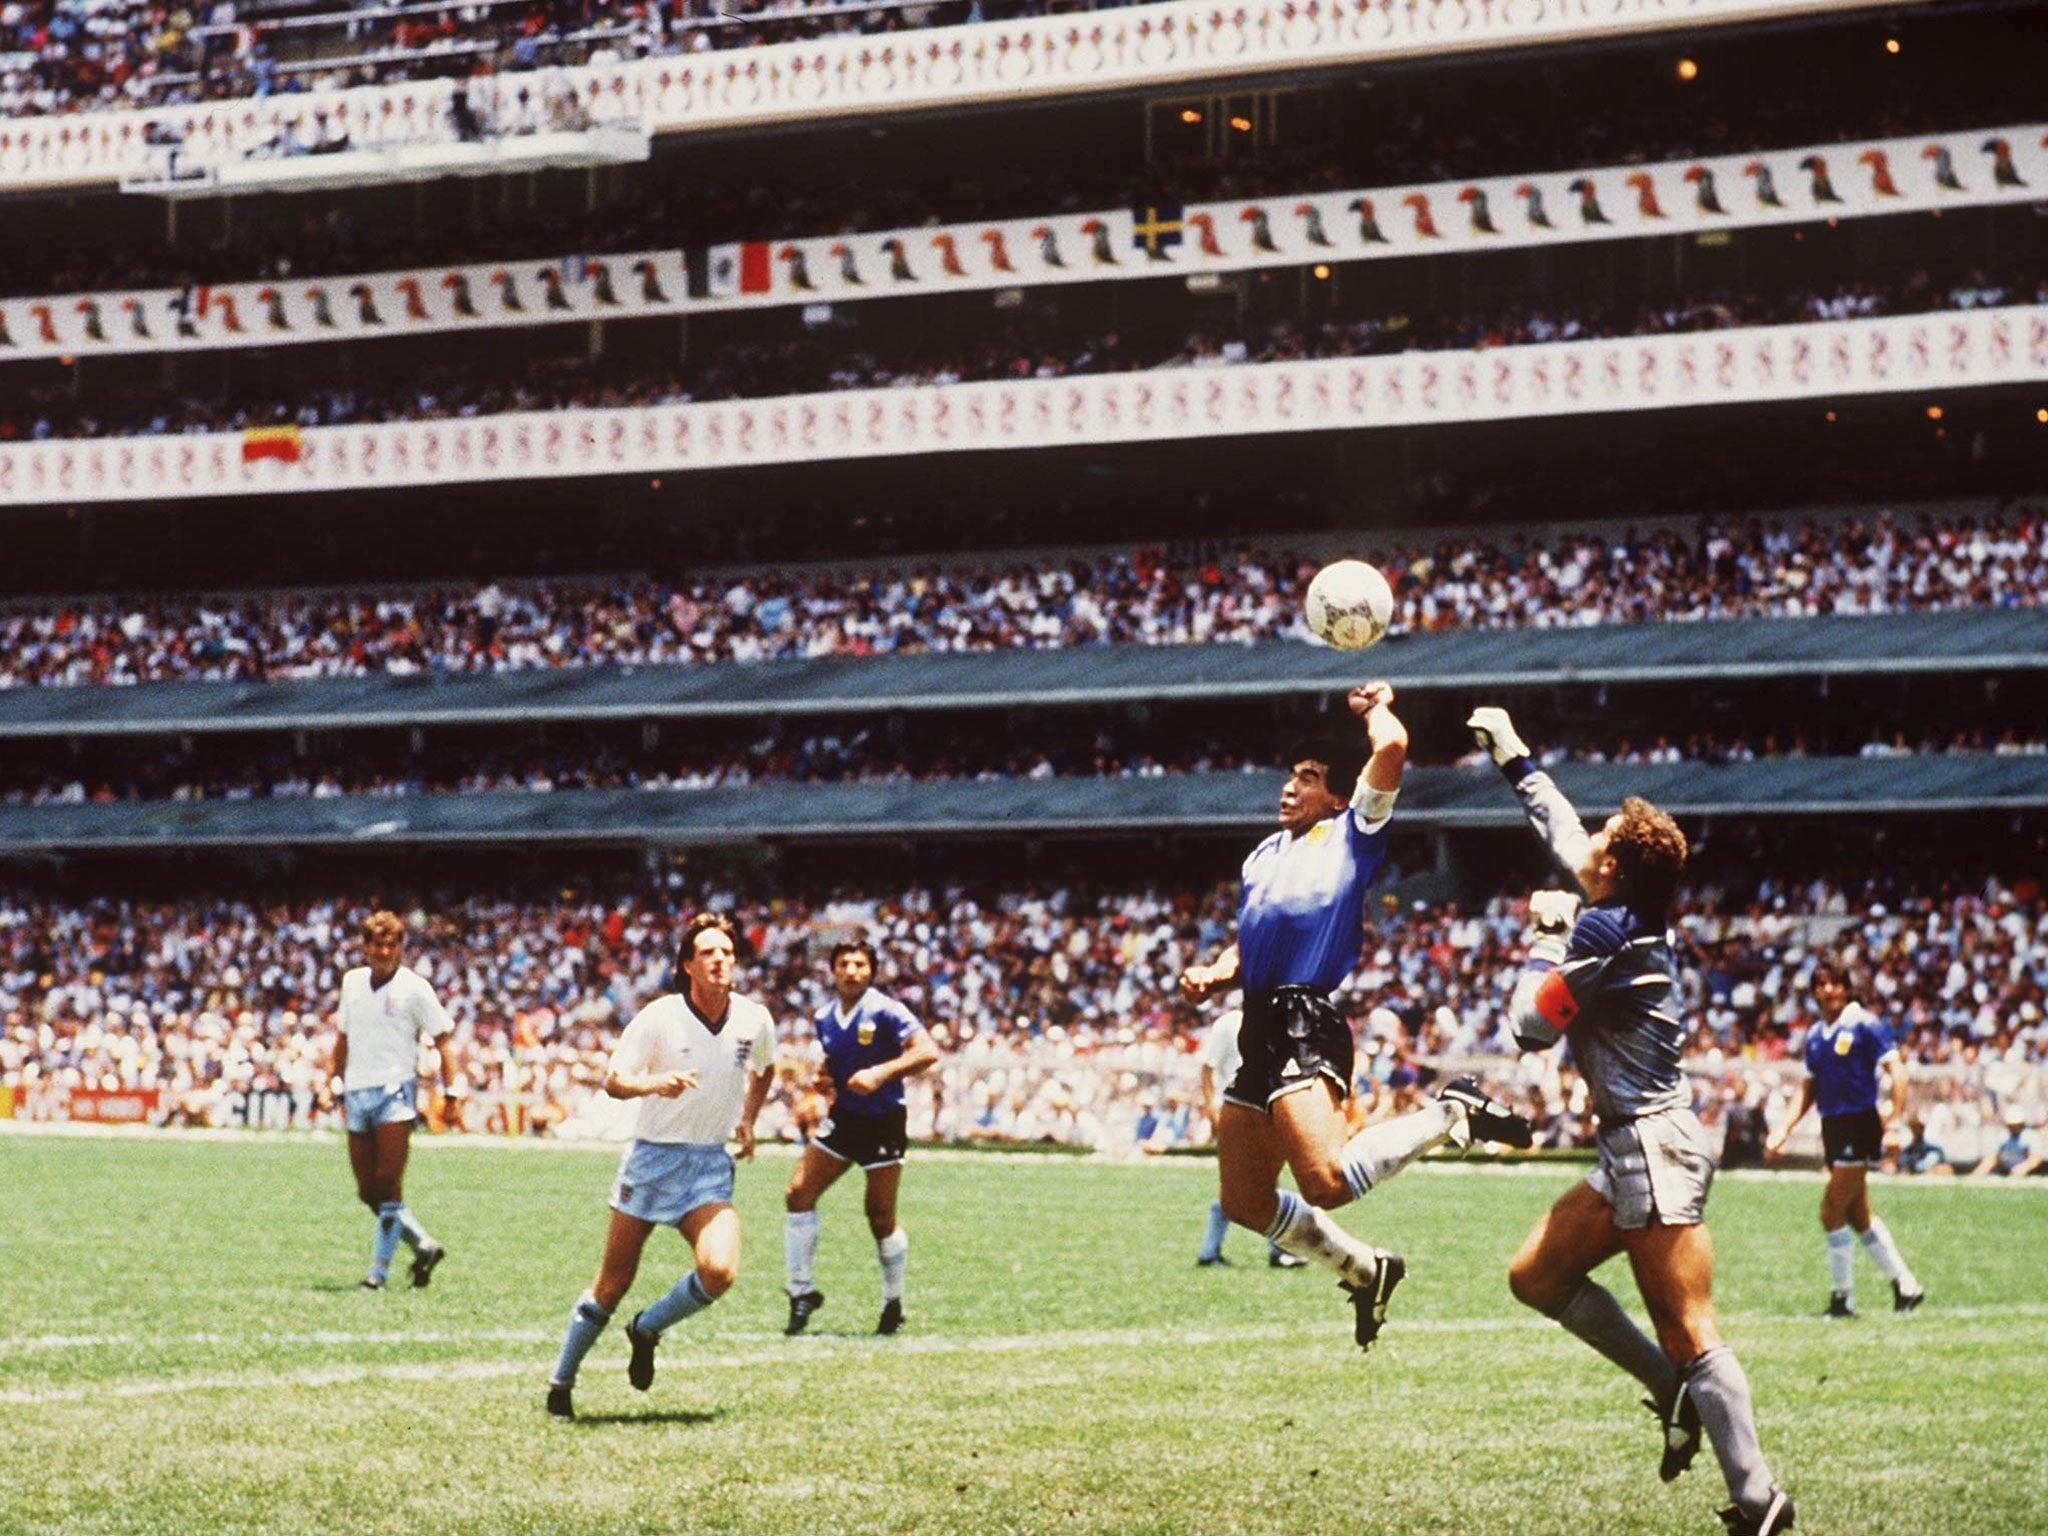 Diego Maradona scores his infamous 'Hand of God' goal against England in 1986